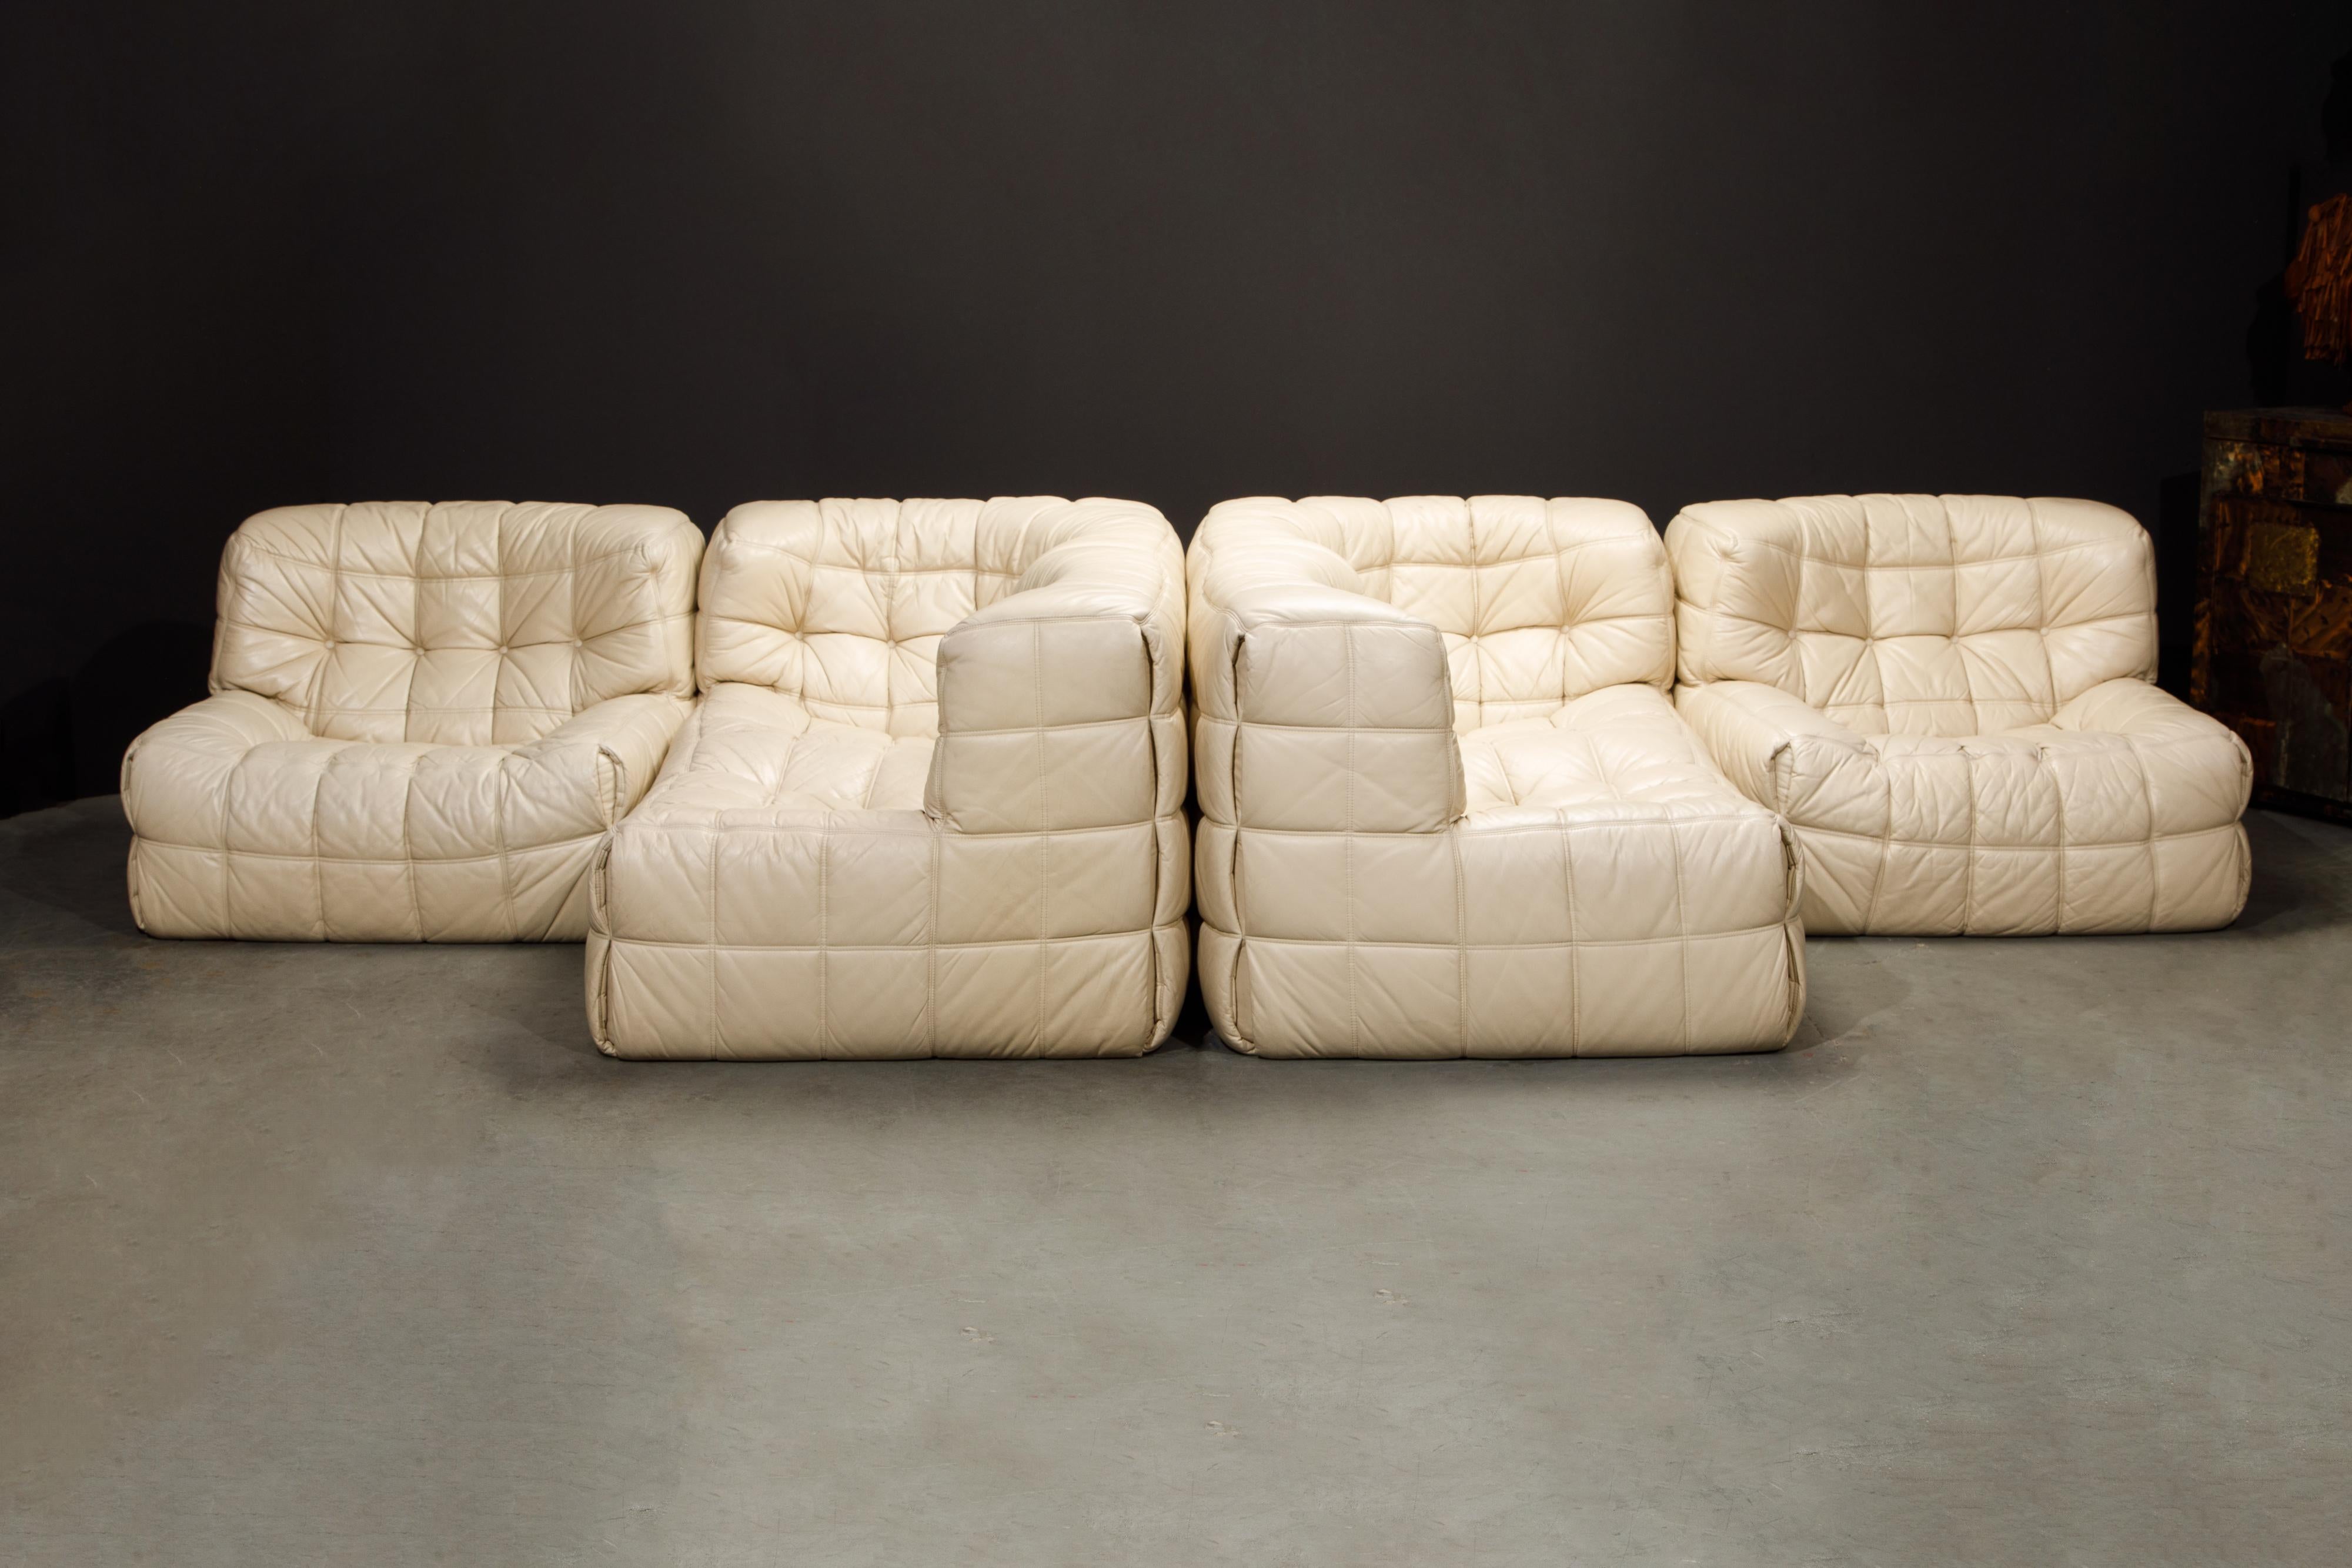 Late 20th Century 'Kashima' Leather Sectional by Michel Ducaroy for Ligne Roset, c. 1976, Signed